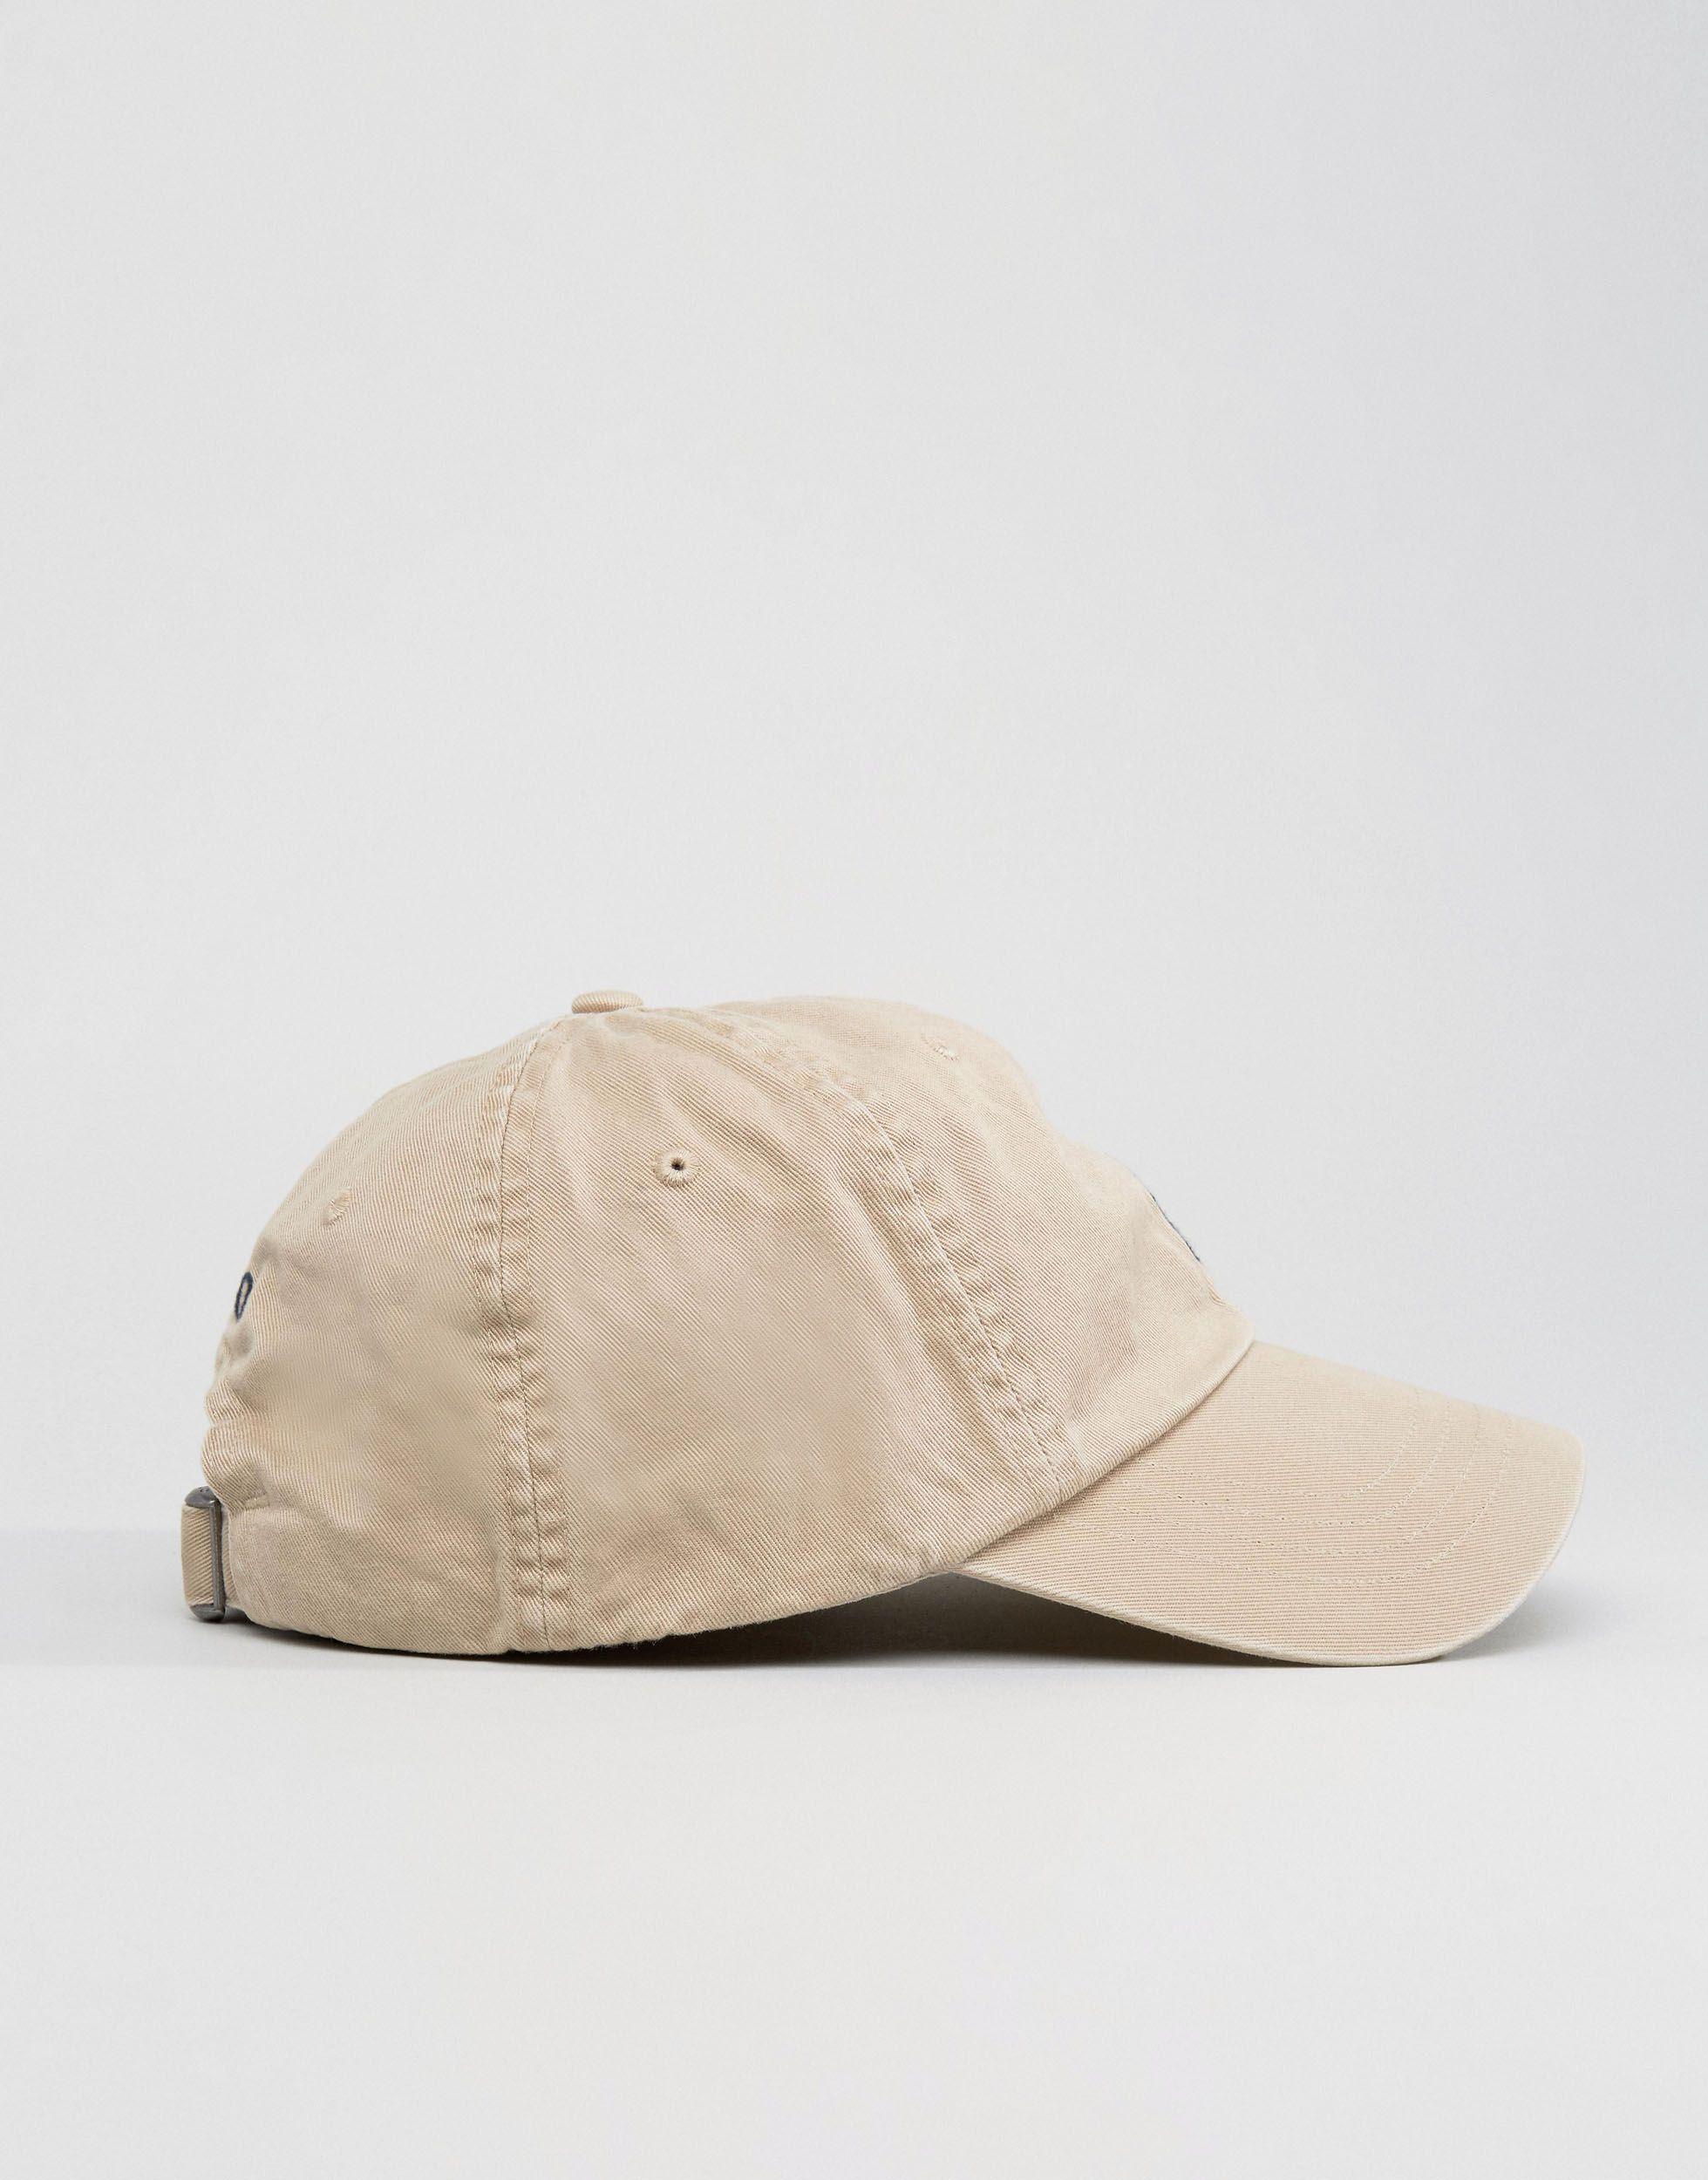 polo ralph lauren logo baseball cap All products are discounted, Cheaper  Than Retail Price, Free Delivery & Returns OFF 64%